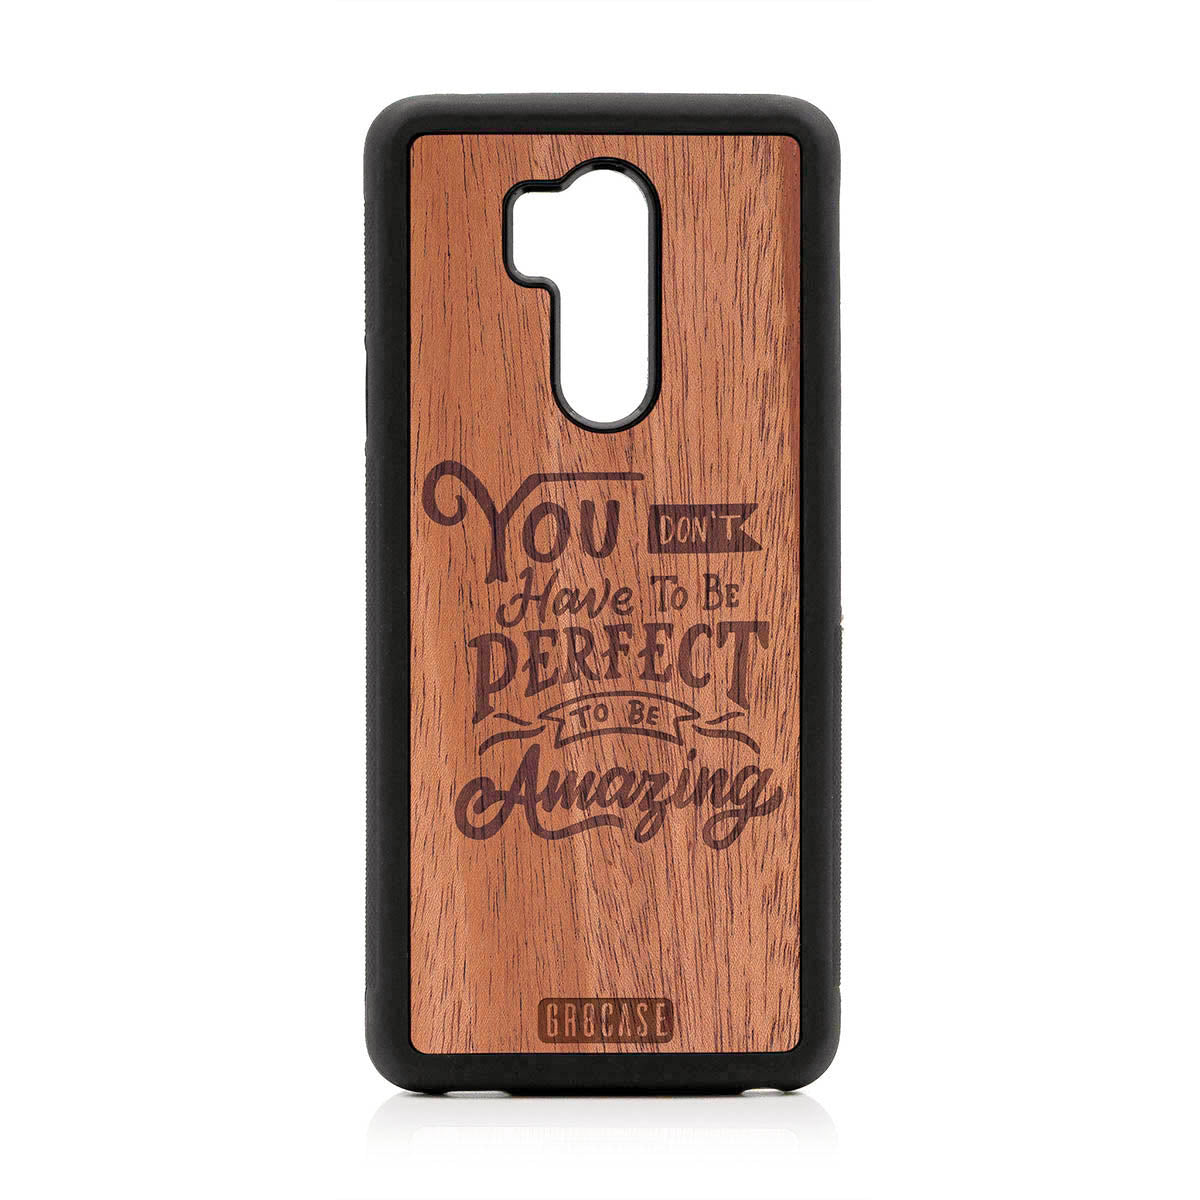 You Don't Have To Be Perfect To Be Amazing Design Wood Case For LG G7 ThinQ